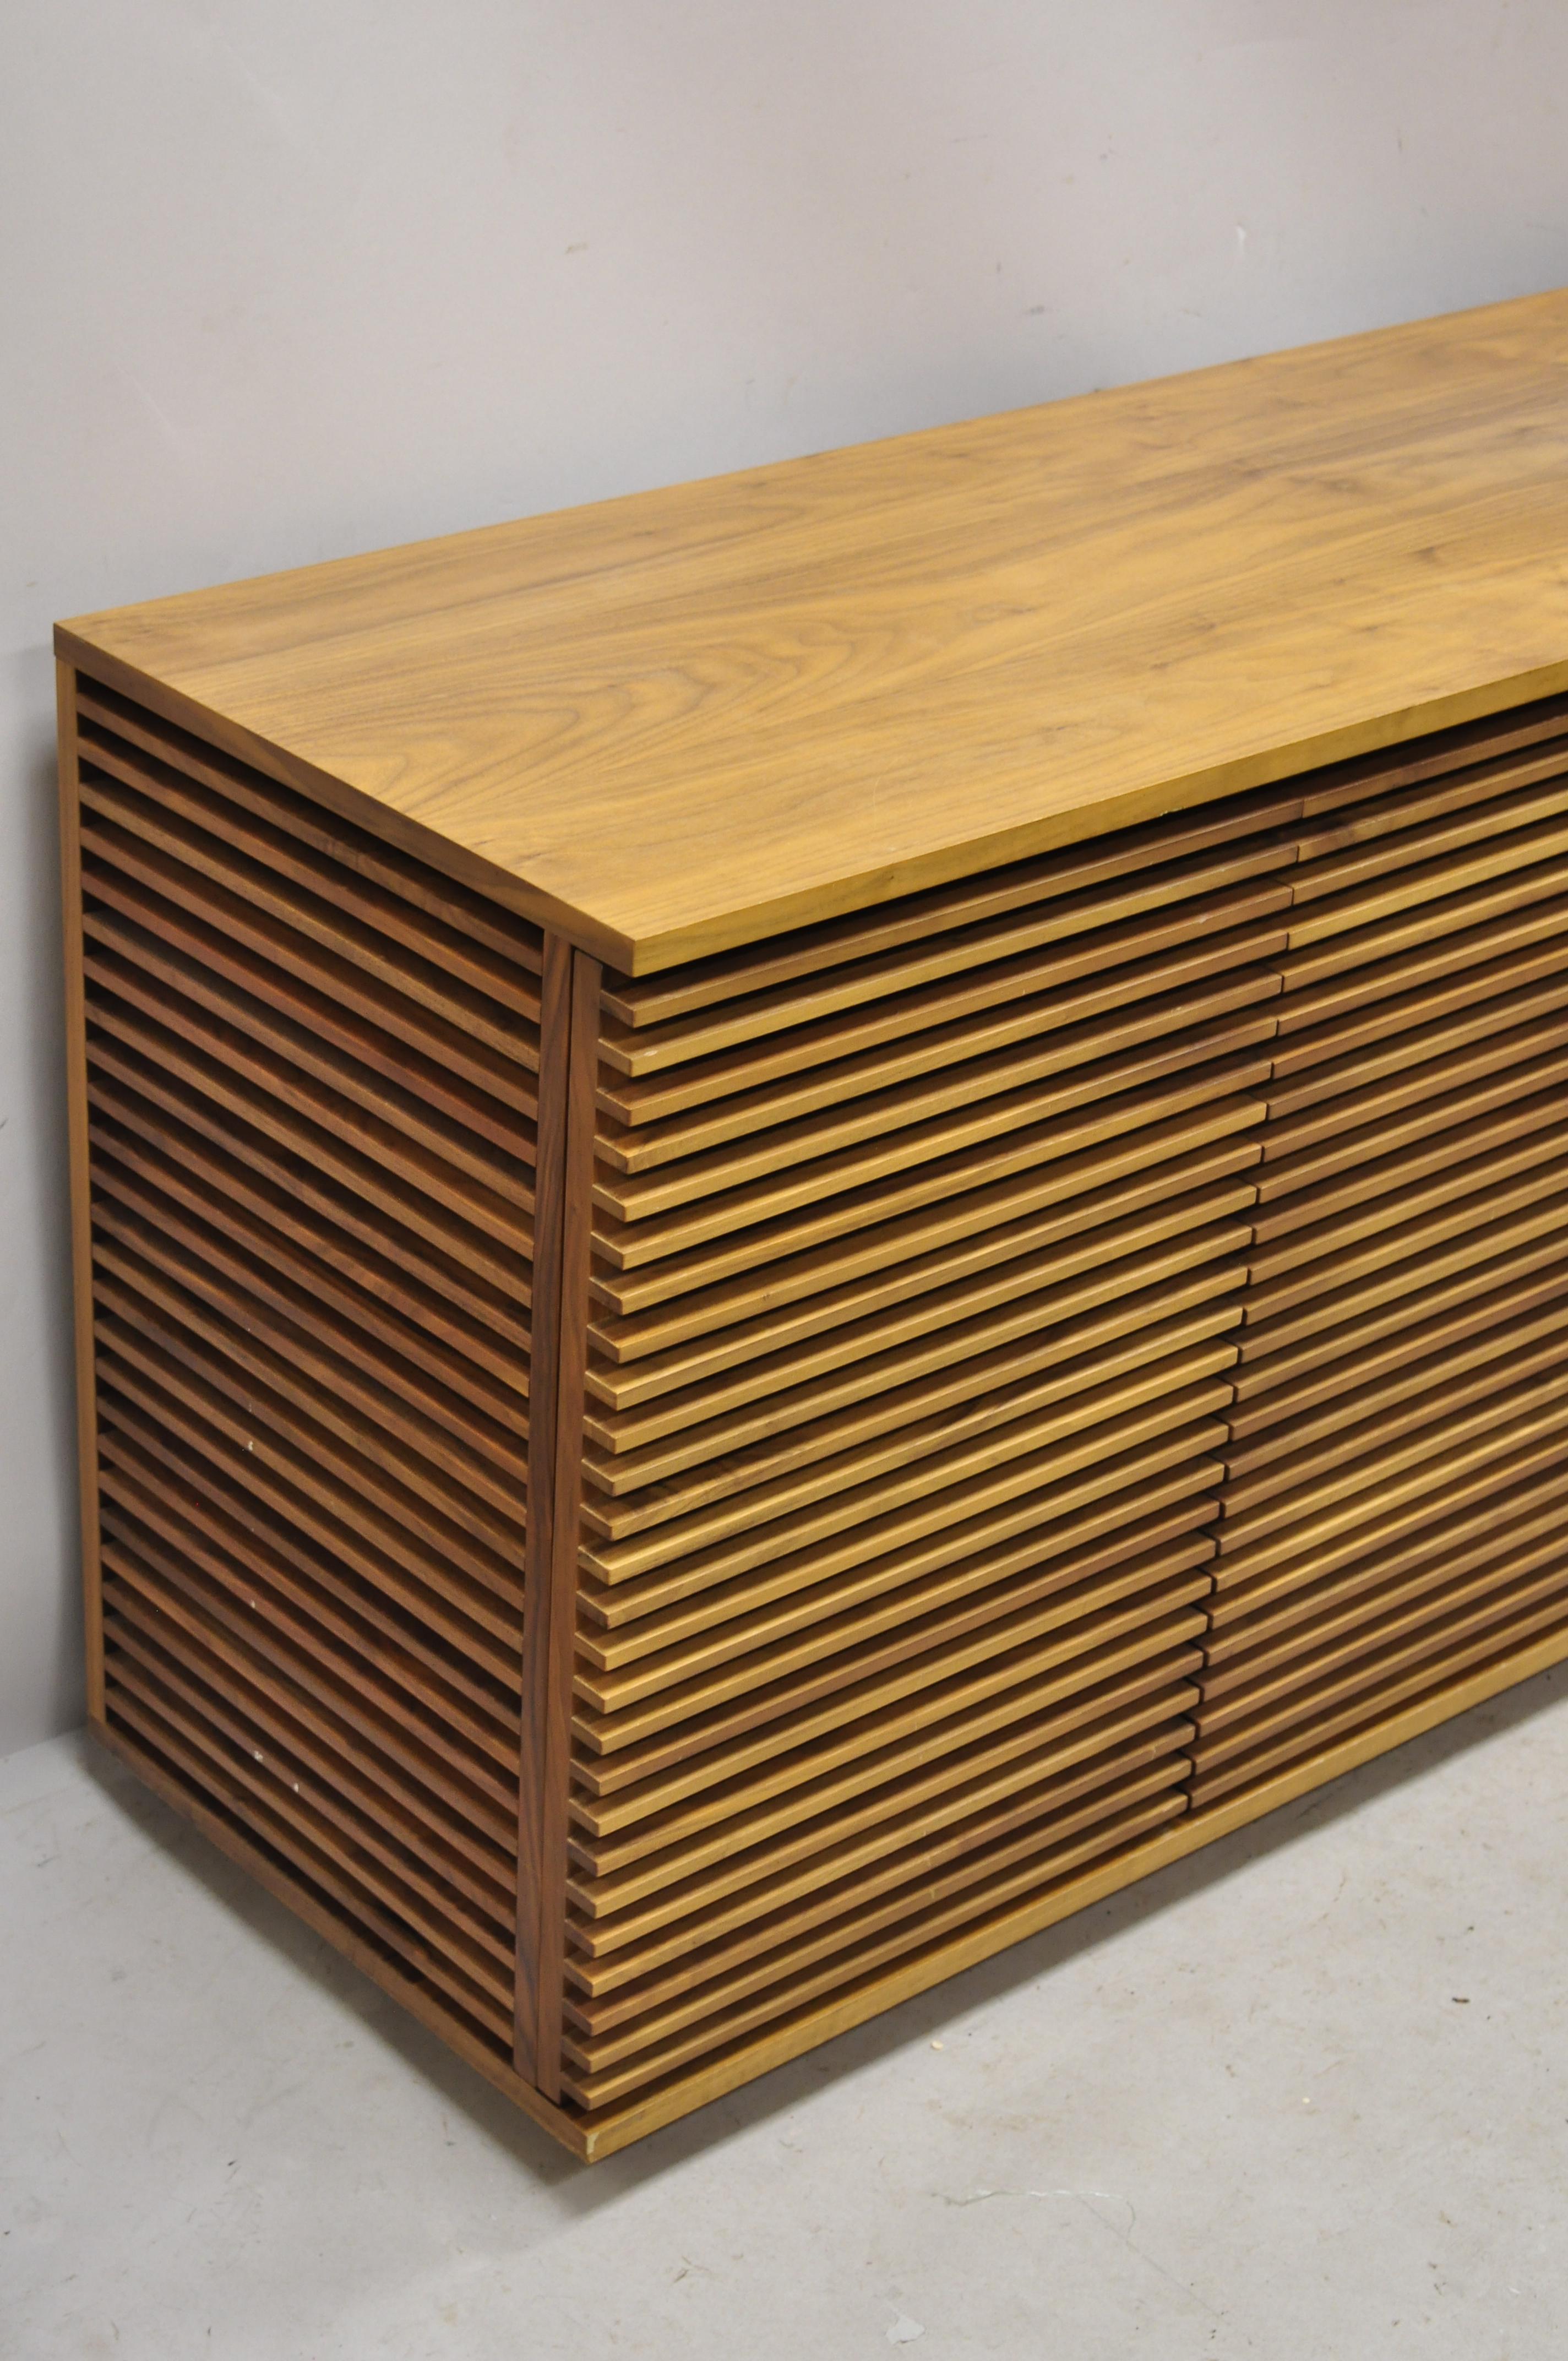 Nathan Young for Design Within Reach Line collection louvered door credenza cabinet. Item features louvered doors, beautiful wood grain, original label, clean modernist lines, quality craftsmanship. From the Line collection by Nathan Young for